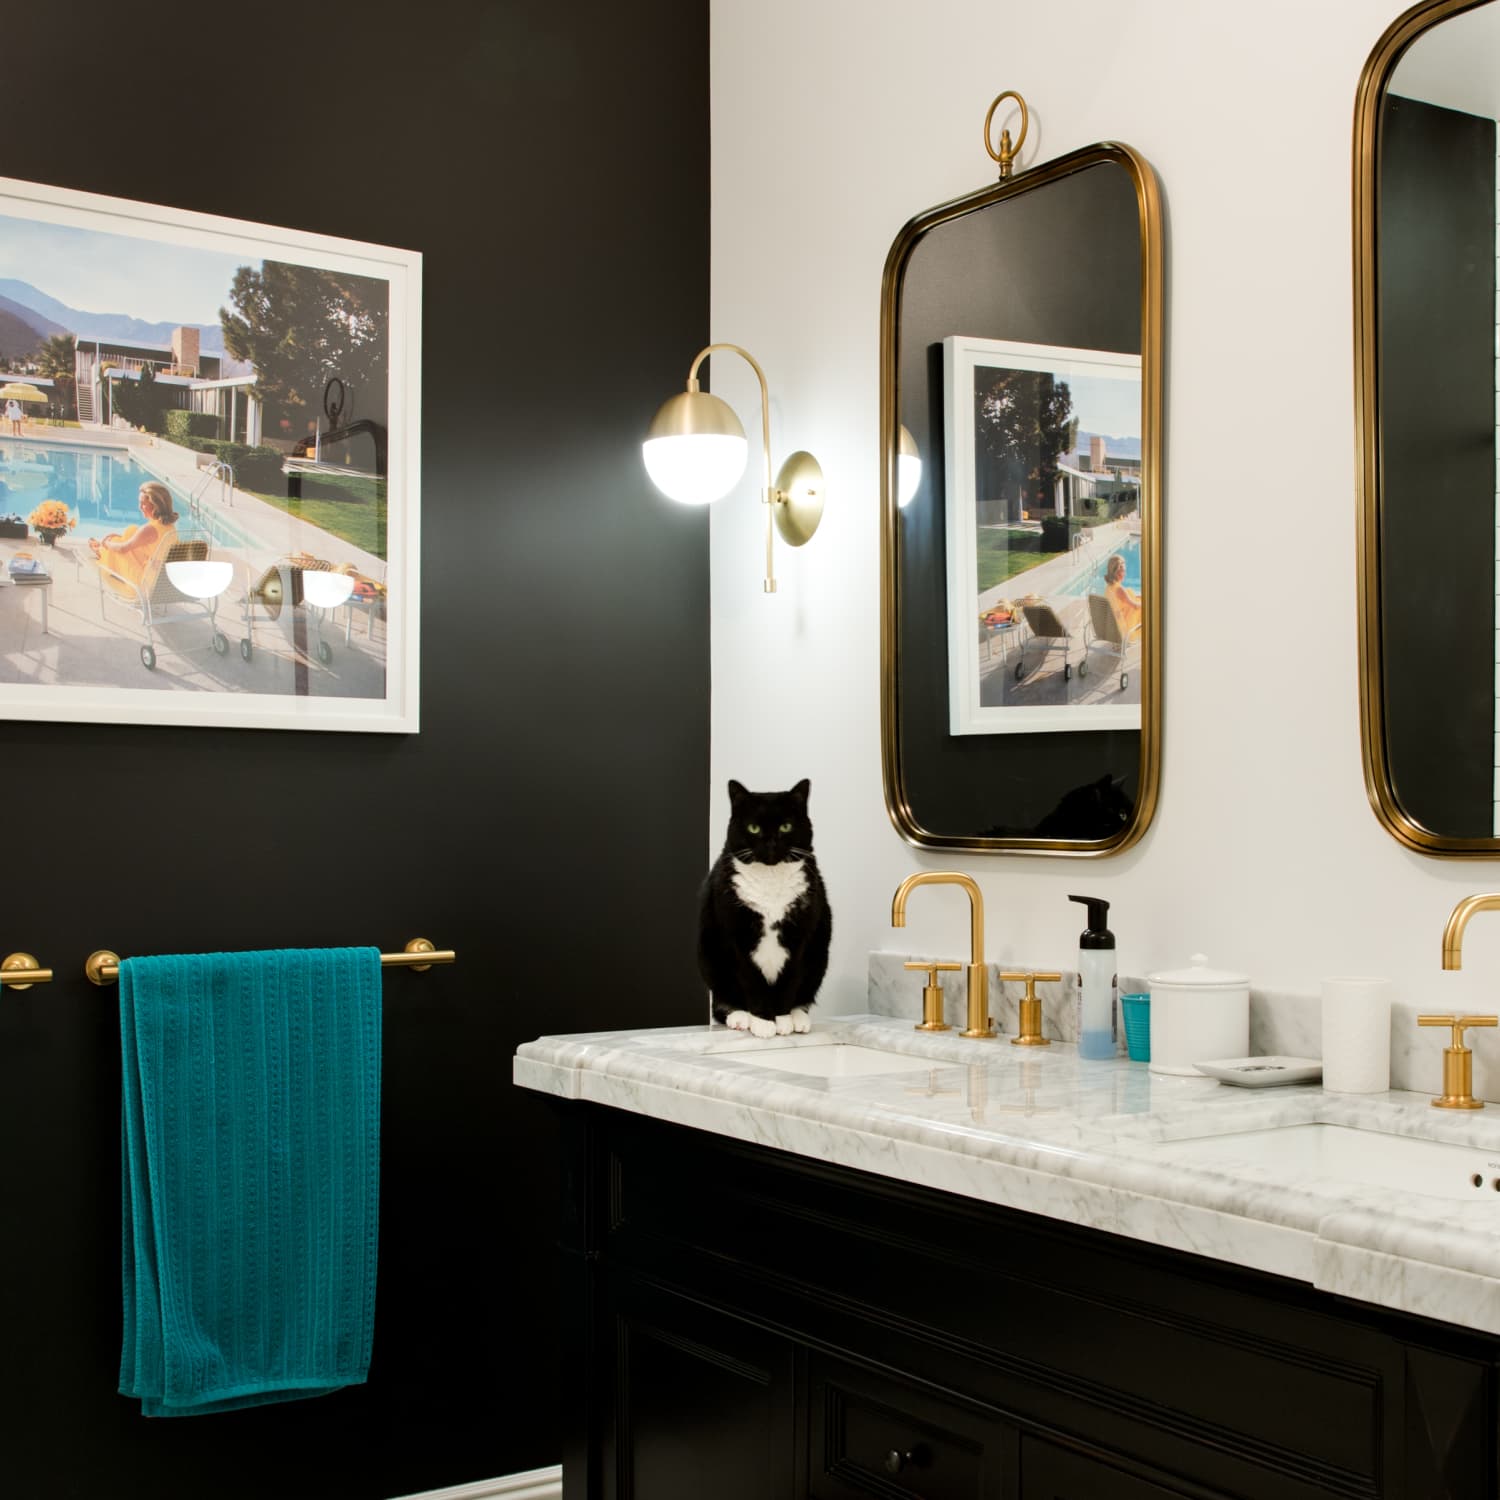 Bathroom Makeover with Black Painted Walls - At Home With The Barkers